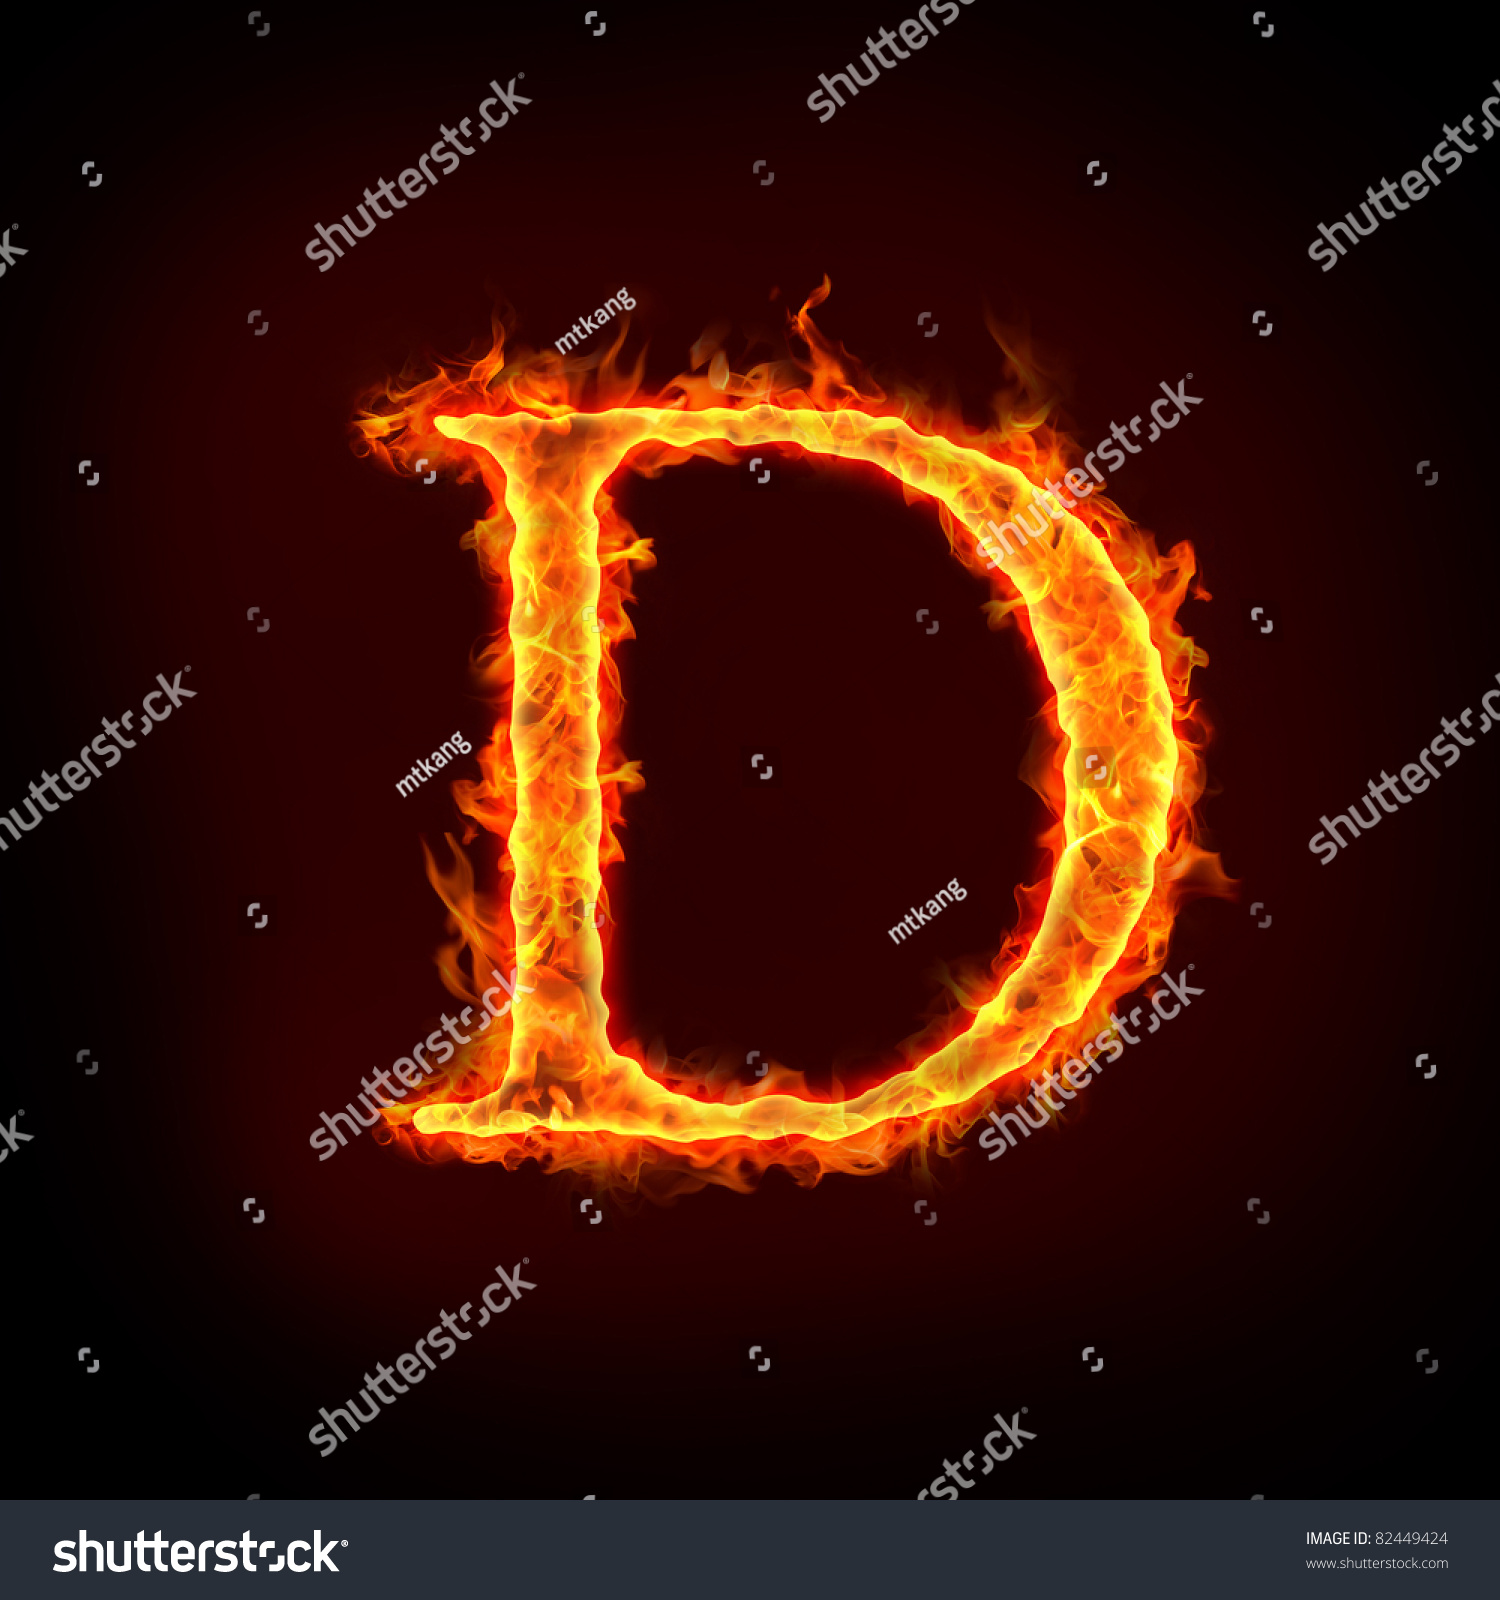 Fire Alphabets In Flame, Letter D Stock Photo 82449424 : Shutterstock